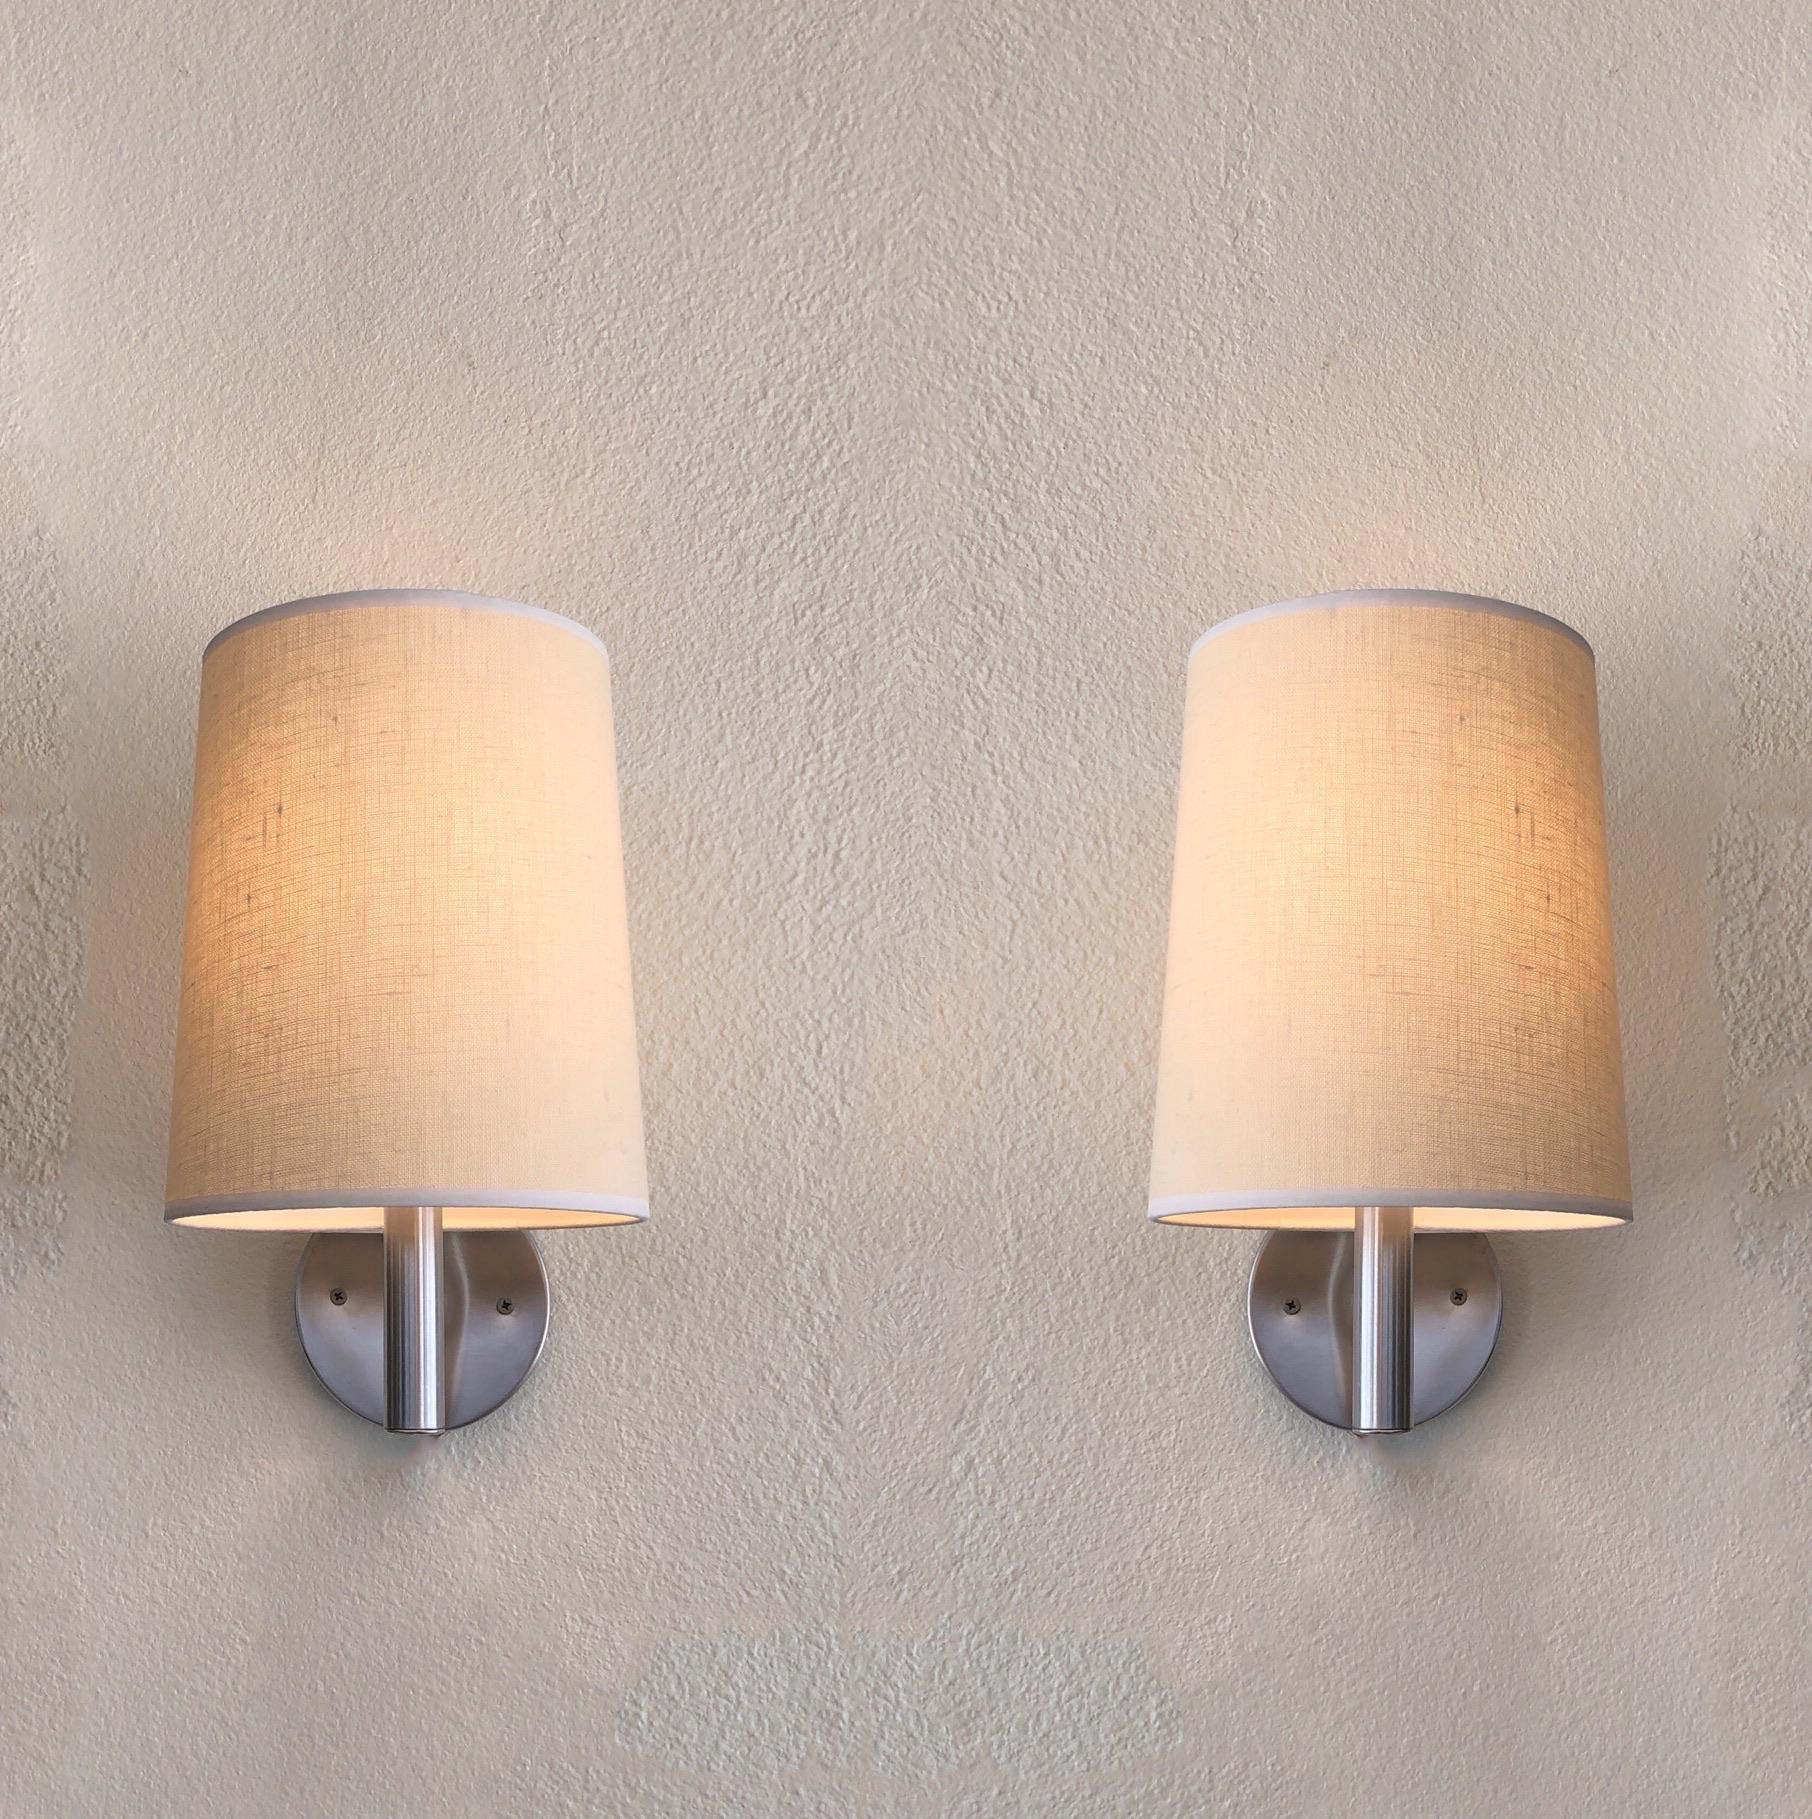 1970’s pair of brushed stainless steel wall sconces design by Walter Von Nessen for Nessen Studio. 
The stainless steel is n original condition, so it shows minor wear.
They have a full range dimmer and take a 75w max regular Edison